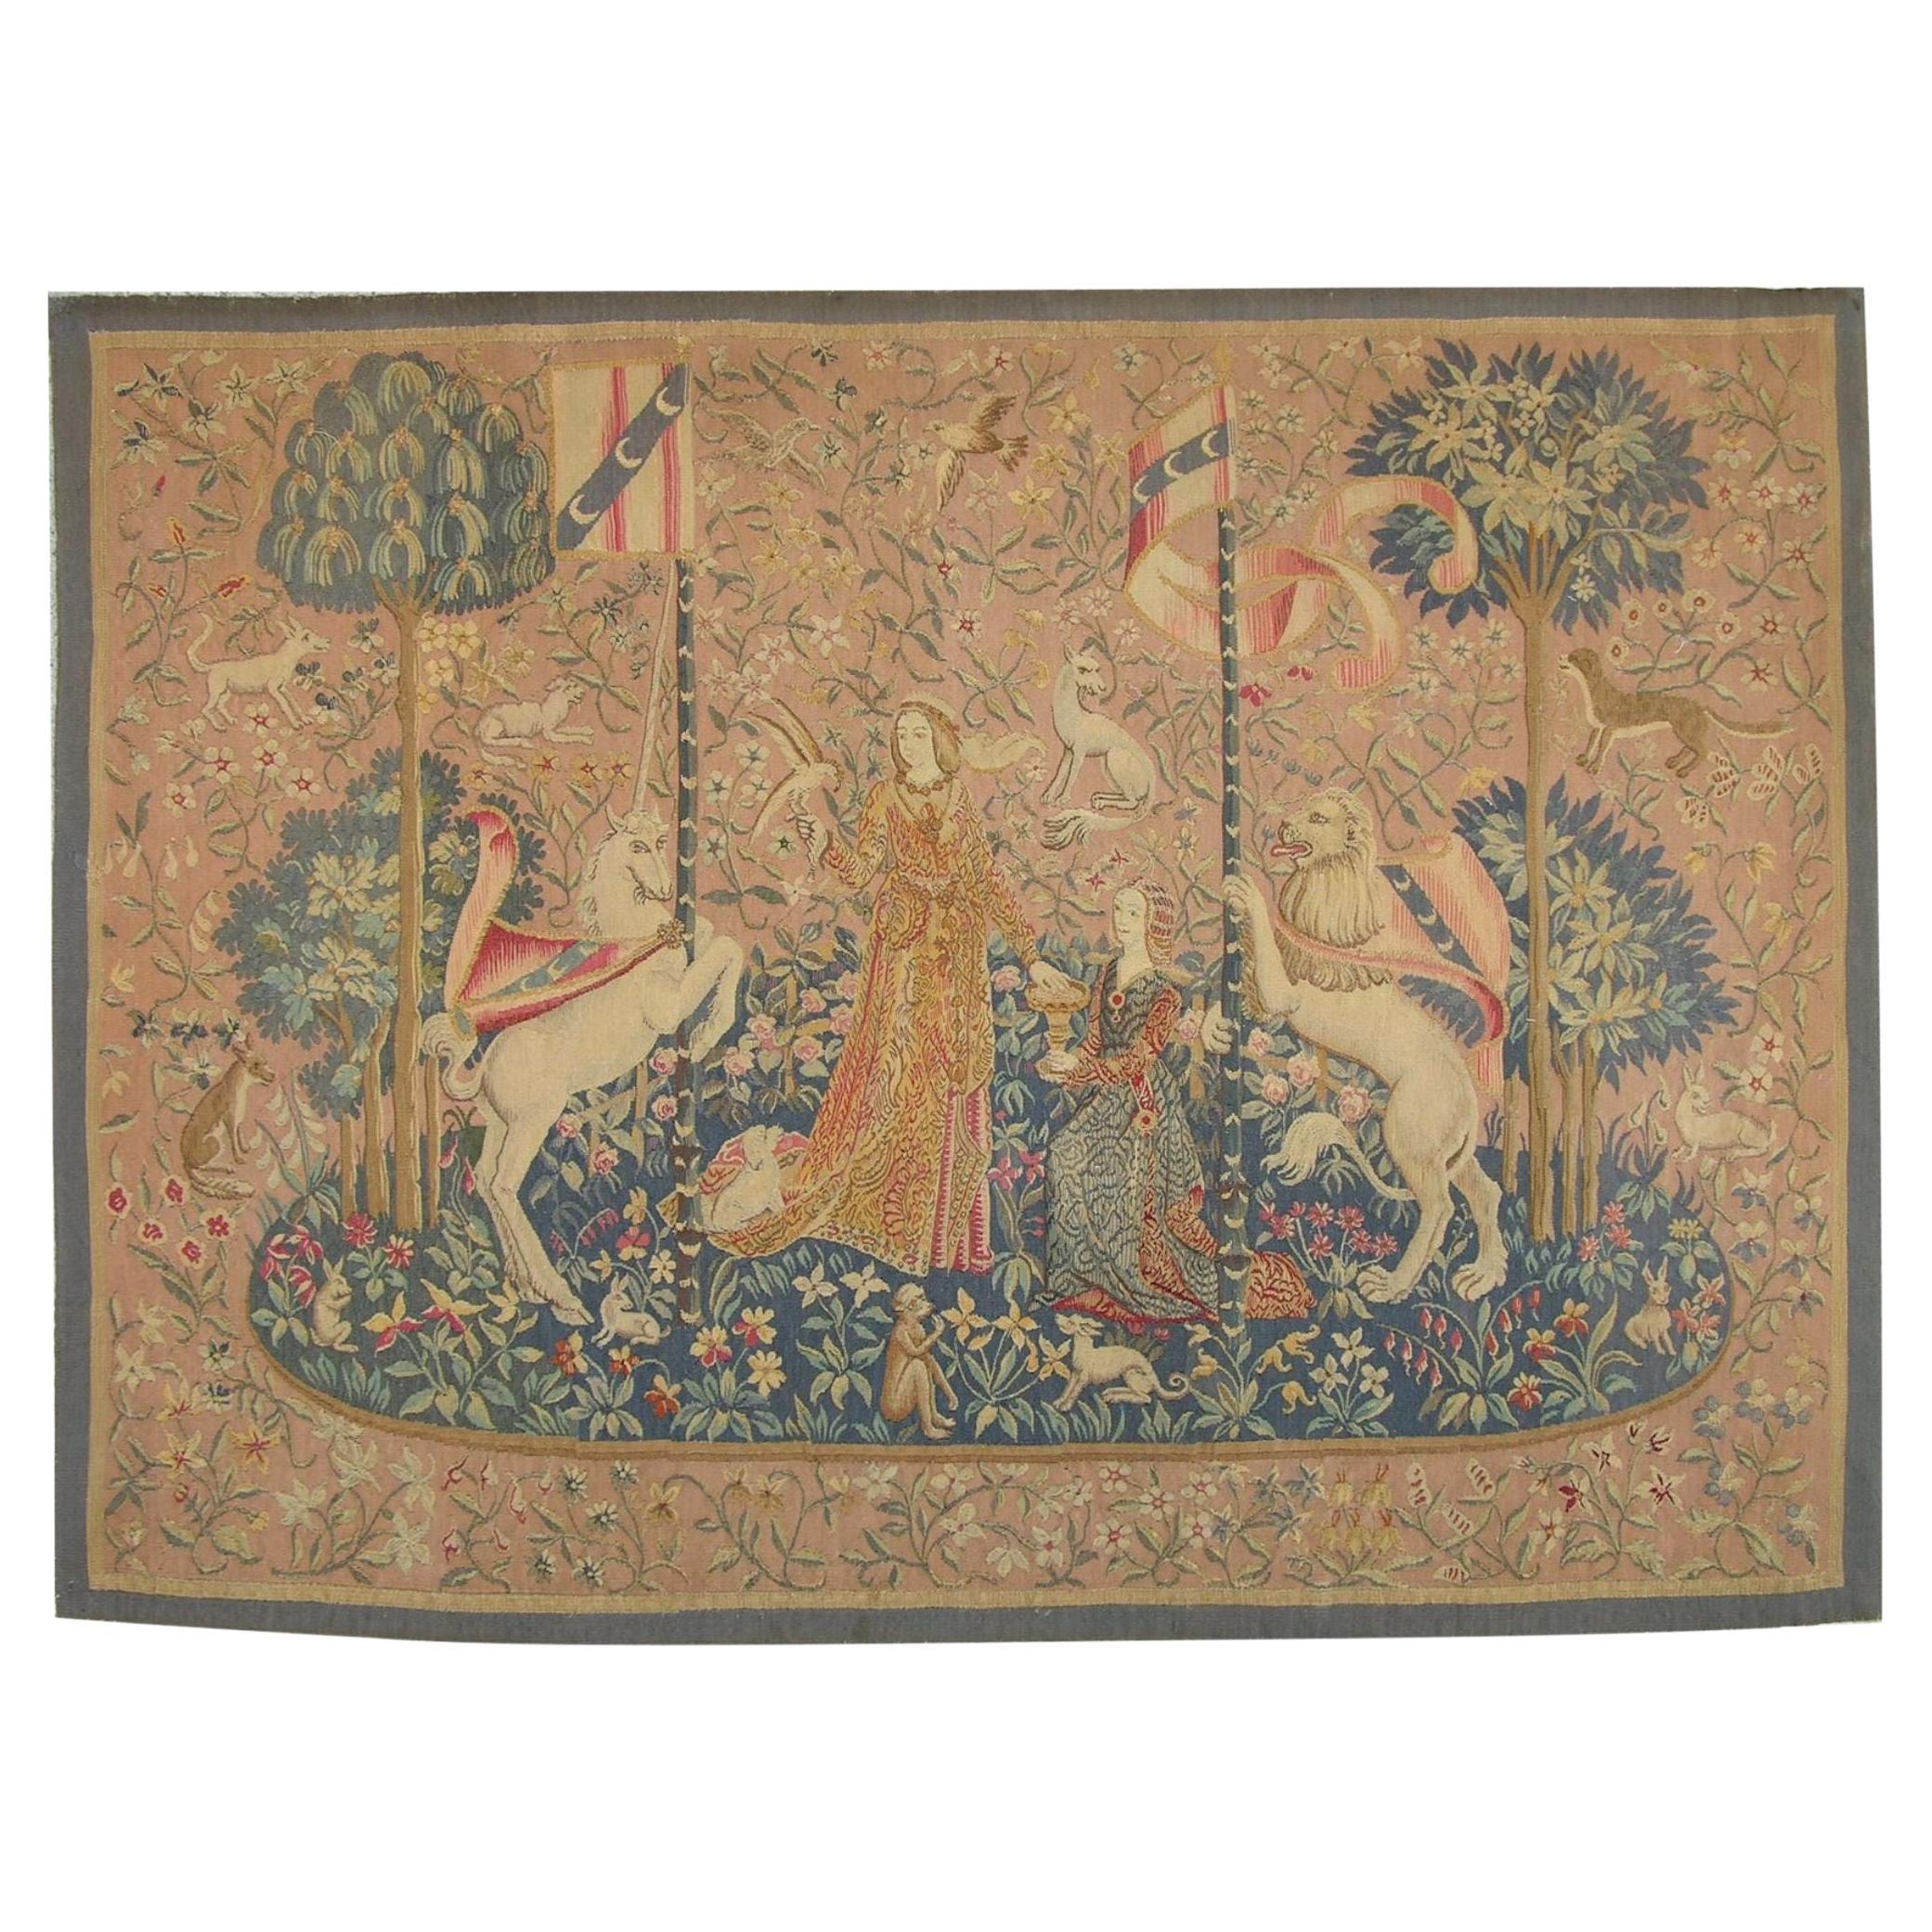 Antique Printed 1920 Tapestry 5'3" X 3'10"